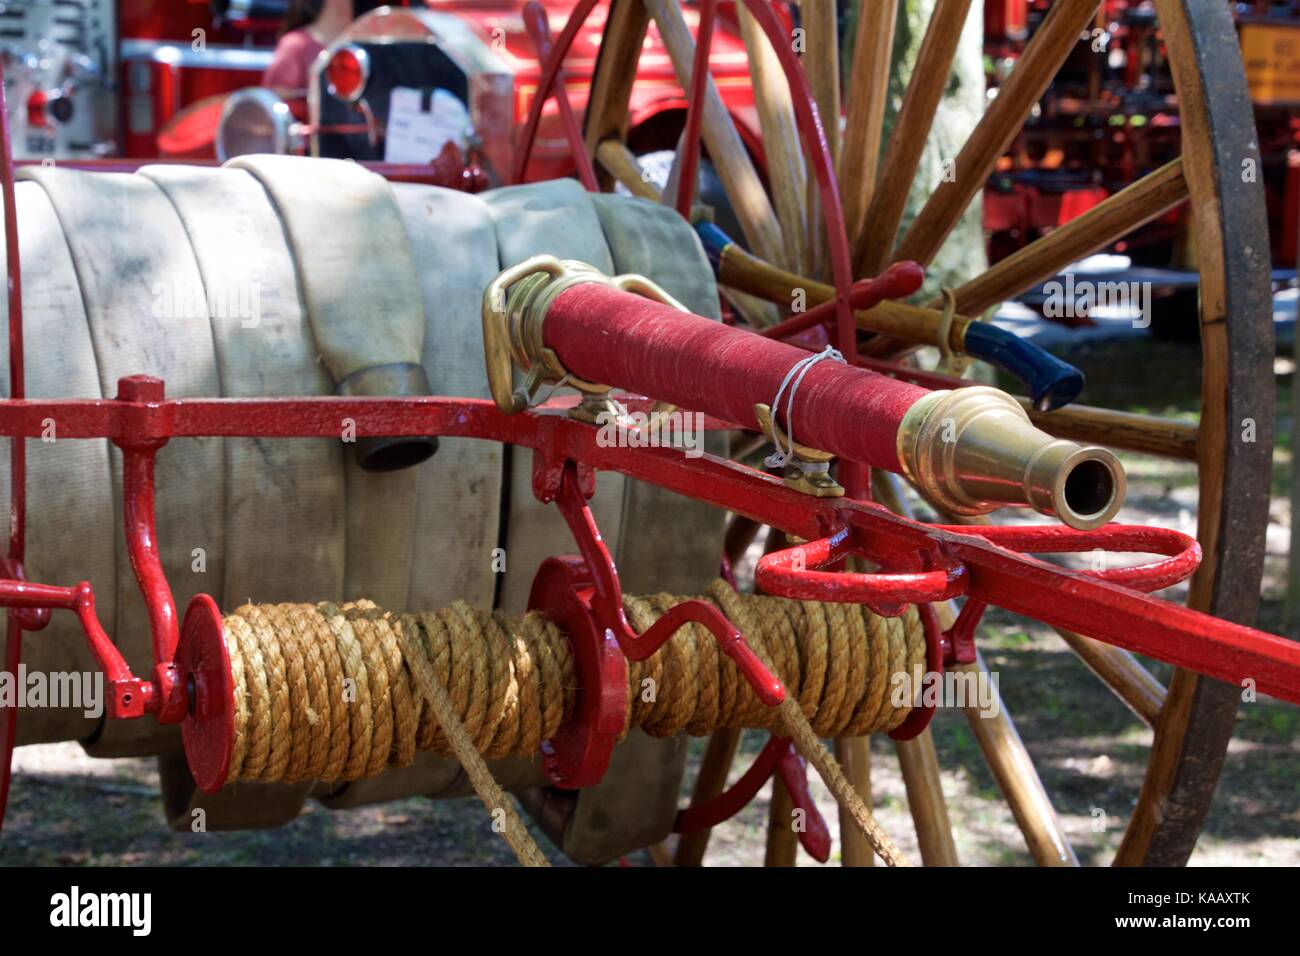 A horse drawn fire pumper at the 37th Annual Fire Apparatus Show and Muster in Millville, NJ. Stock Photo